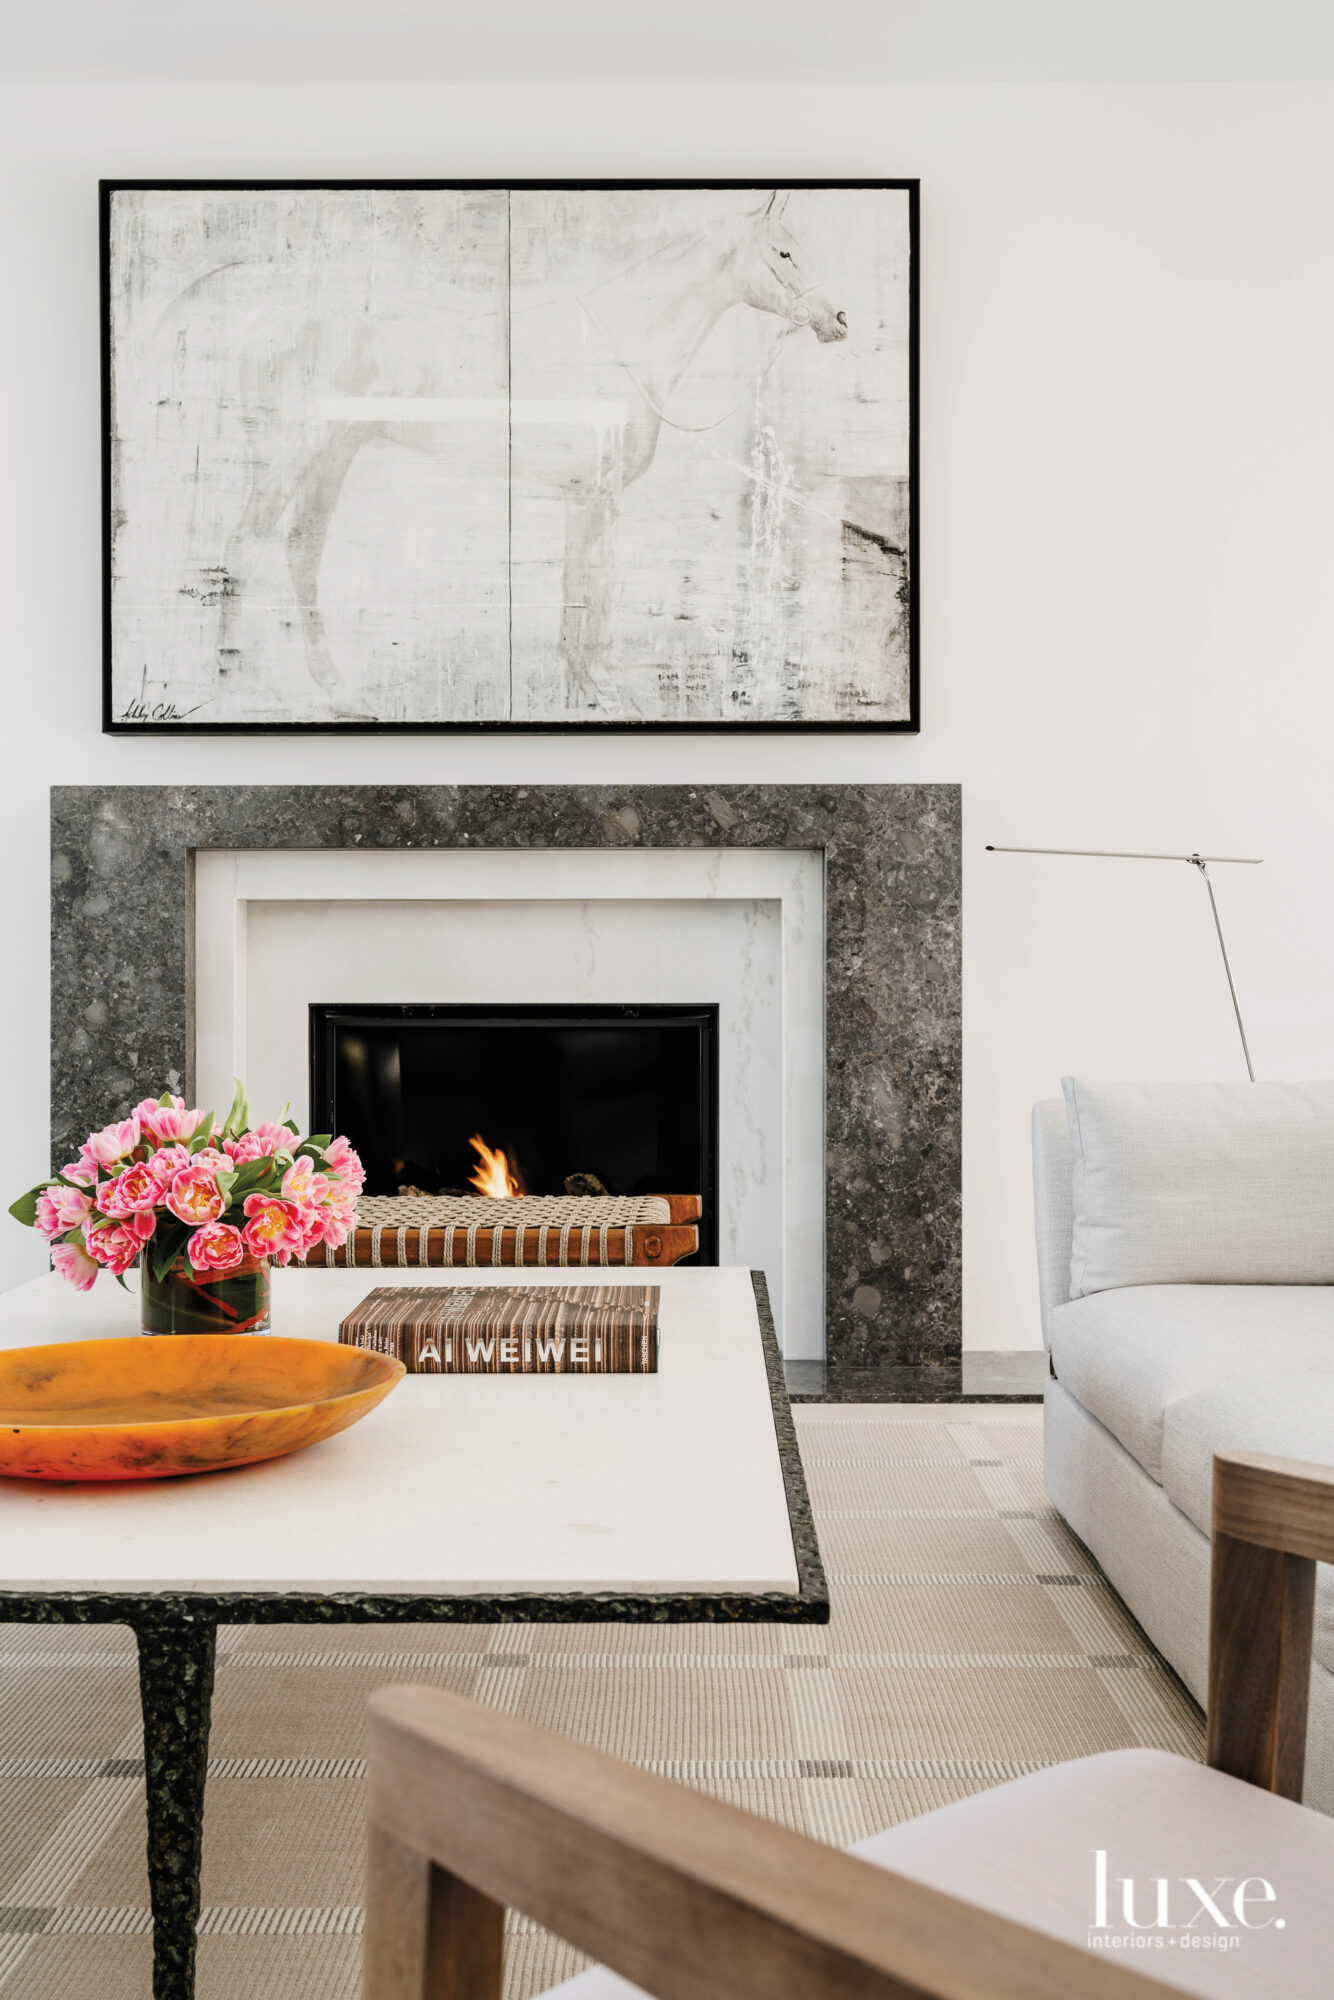 AShley Collins painting hangs above the fireplace.